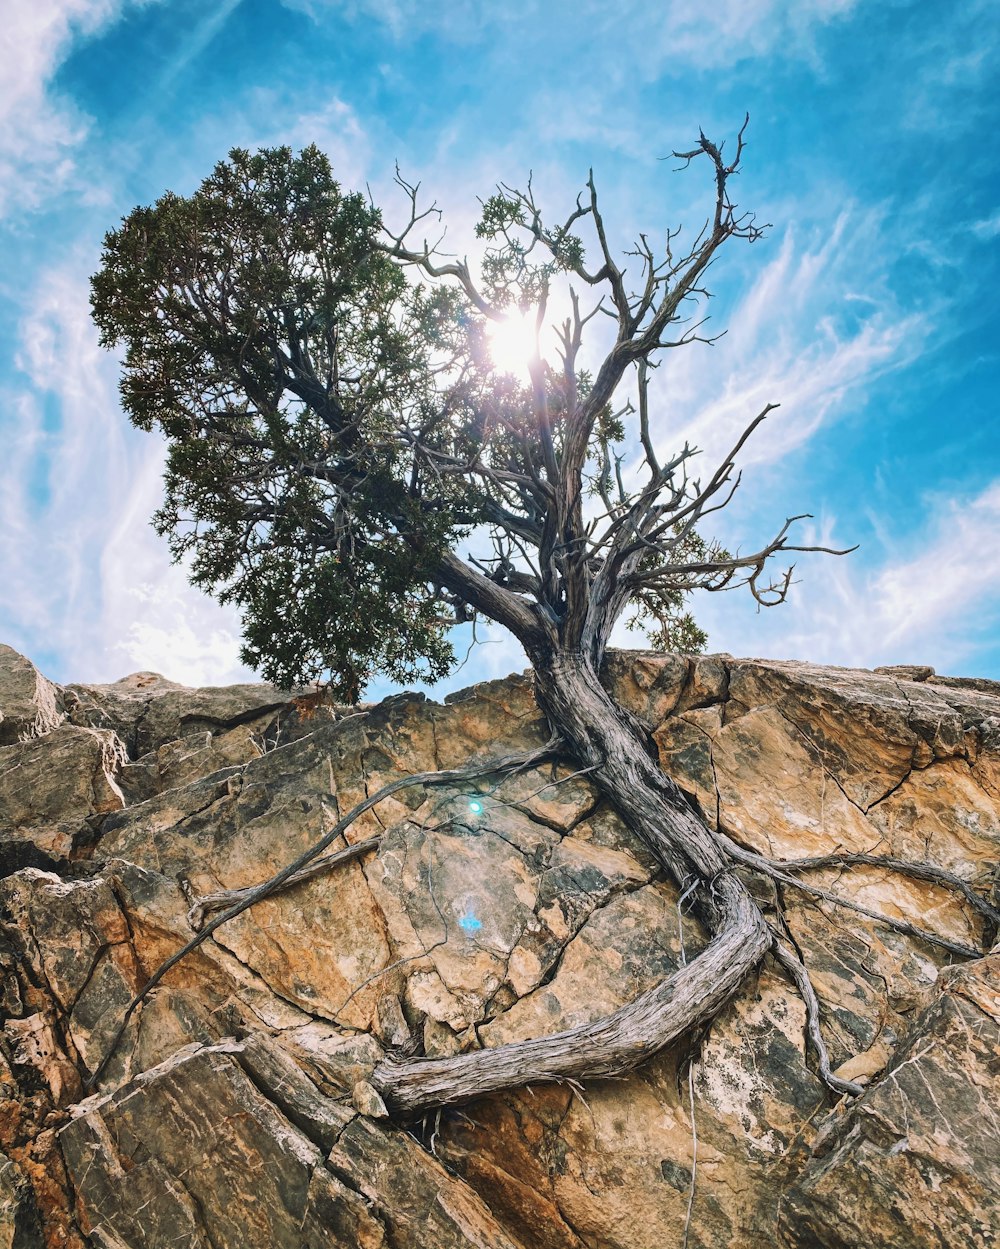 green tree on brown rock formation under blue sky and white clouds during daytime